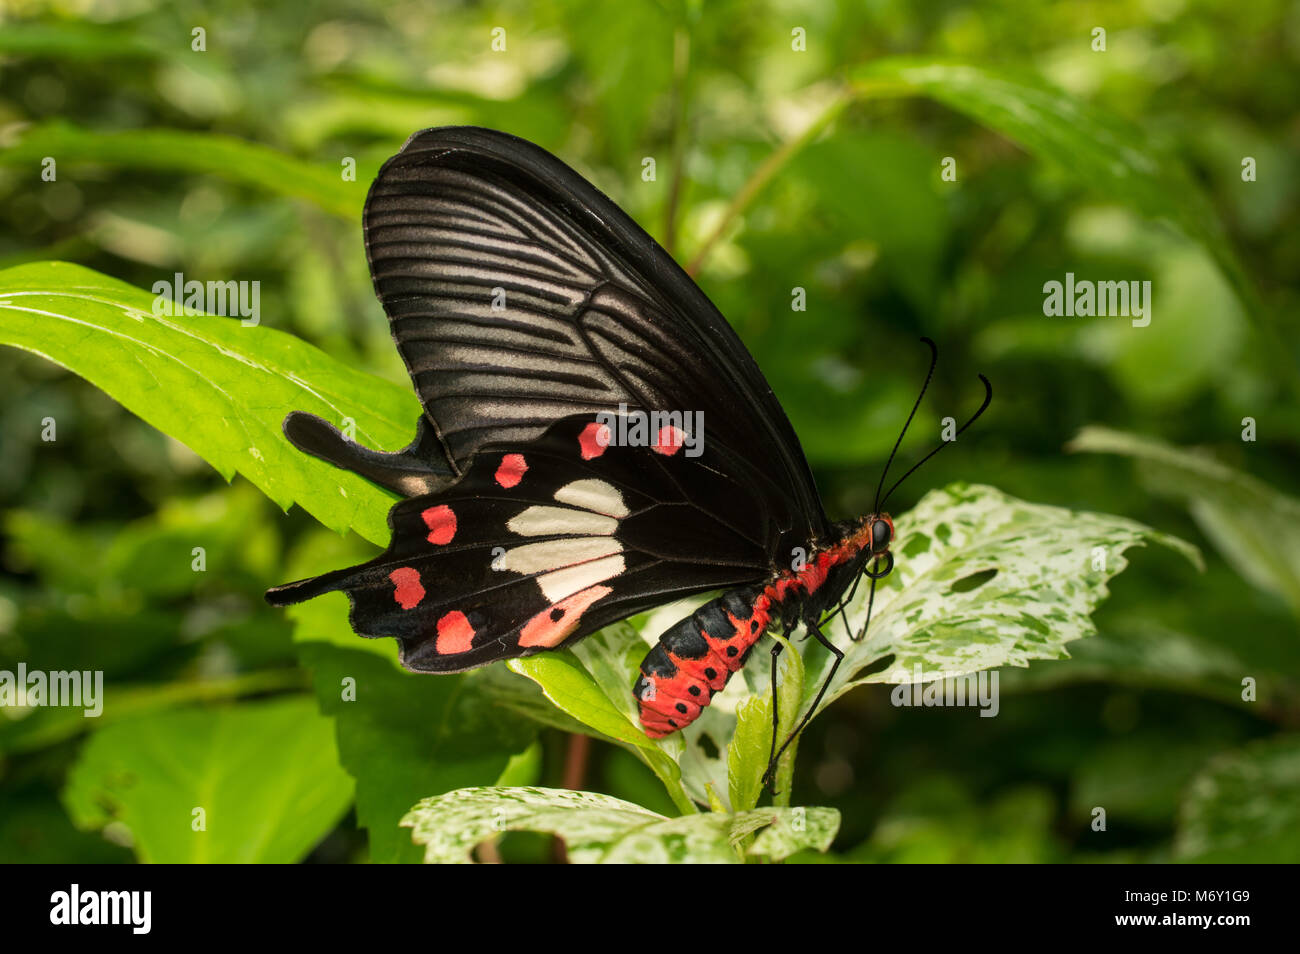 Common rose (Pachliopta aristolochiae) butterfly holding leaf in the garden, insect in Thailand Stock Photo